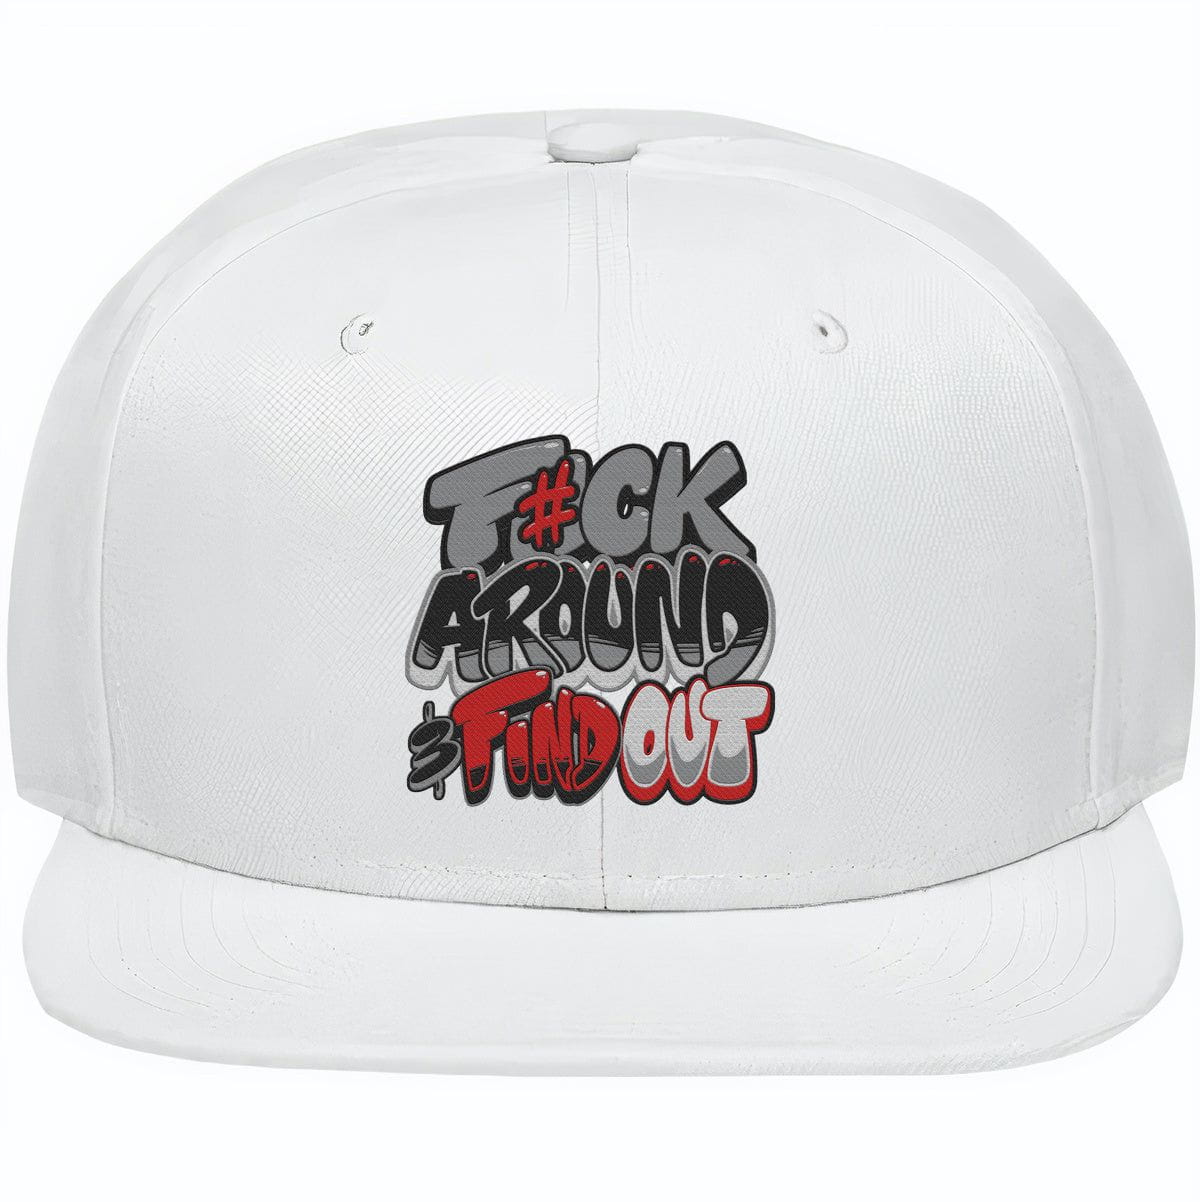 Red Taxi 12s Snapback Hat - Jordan 12 Red Taxis Hats - F#ck